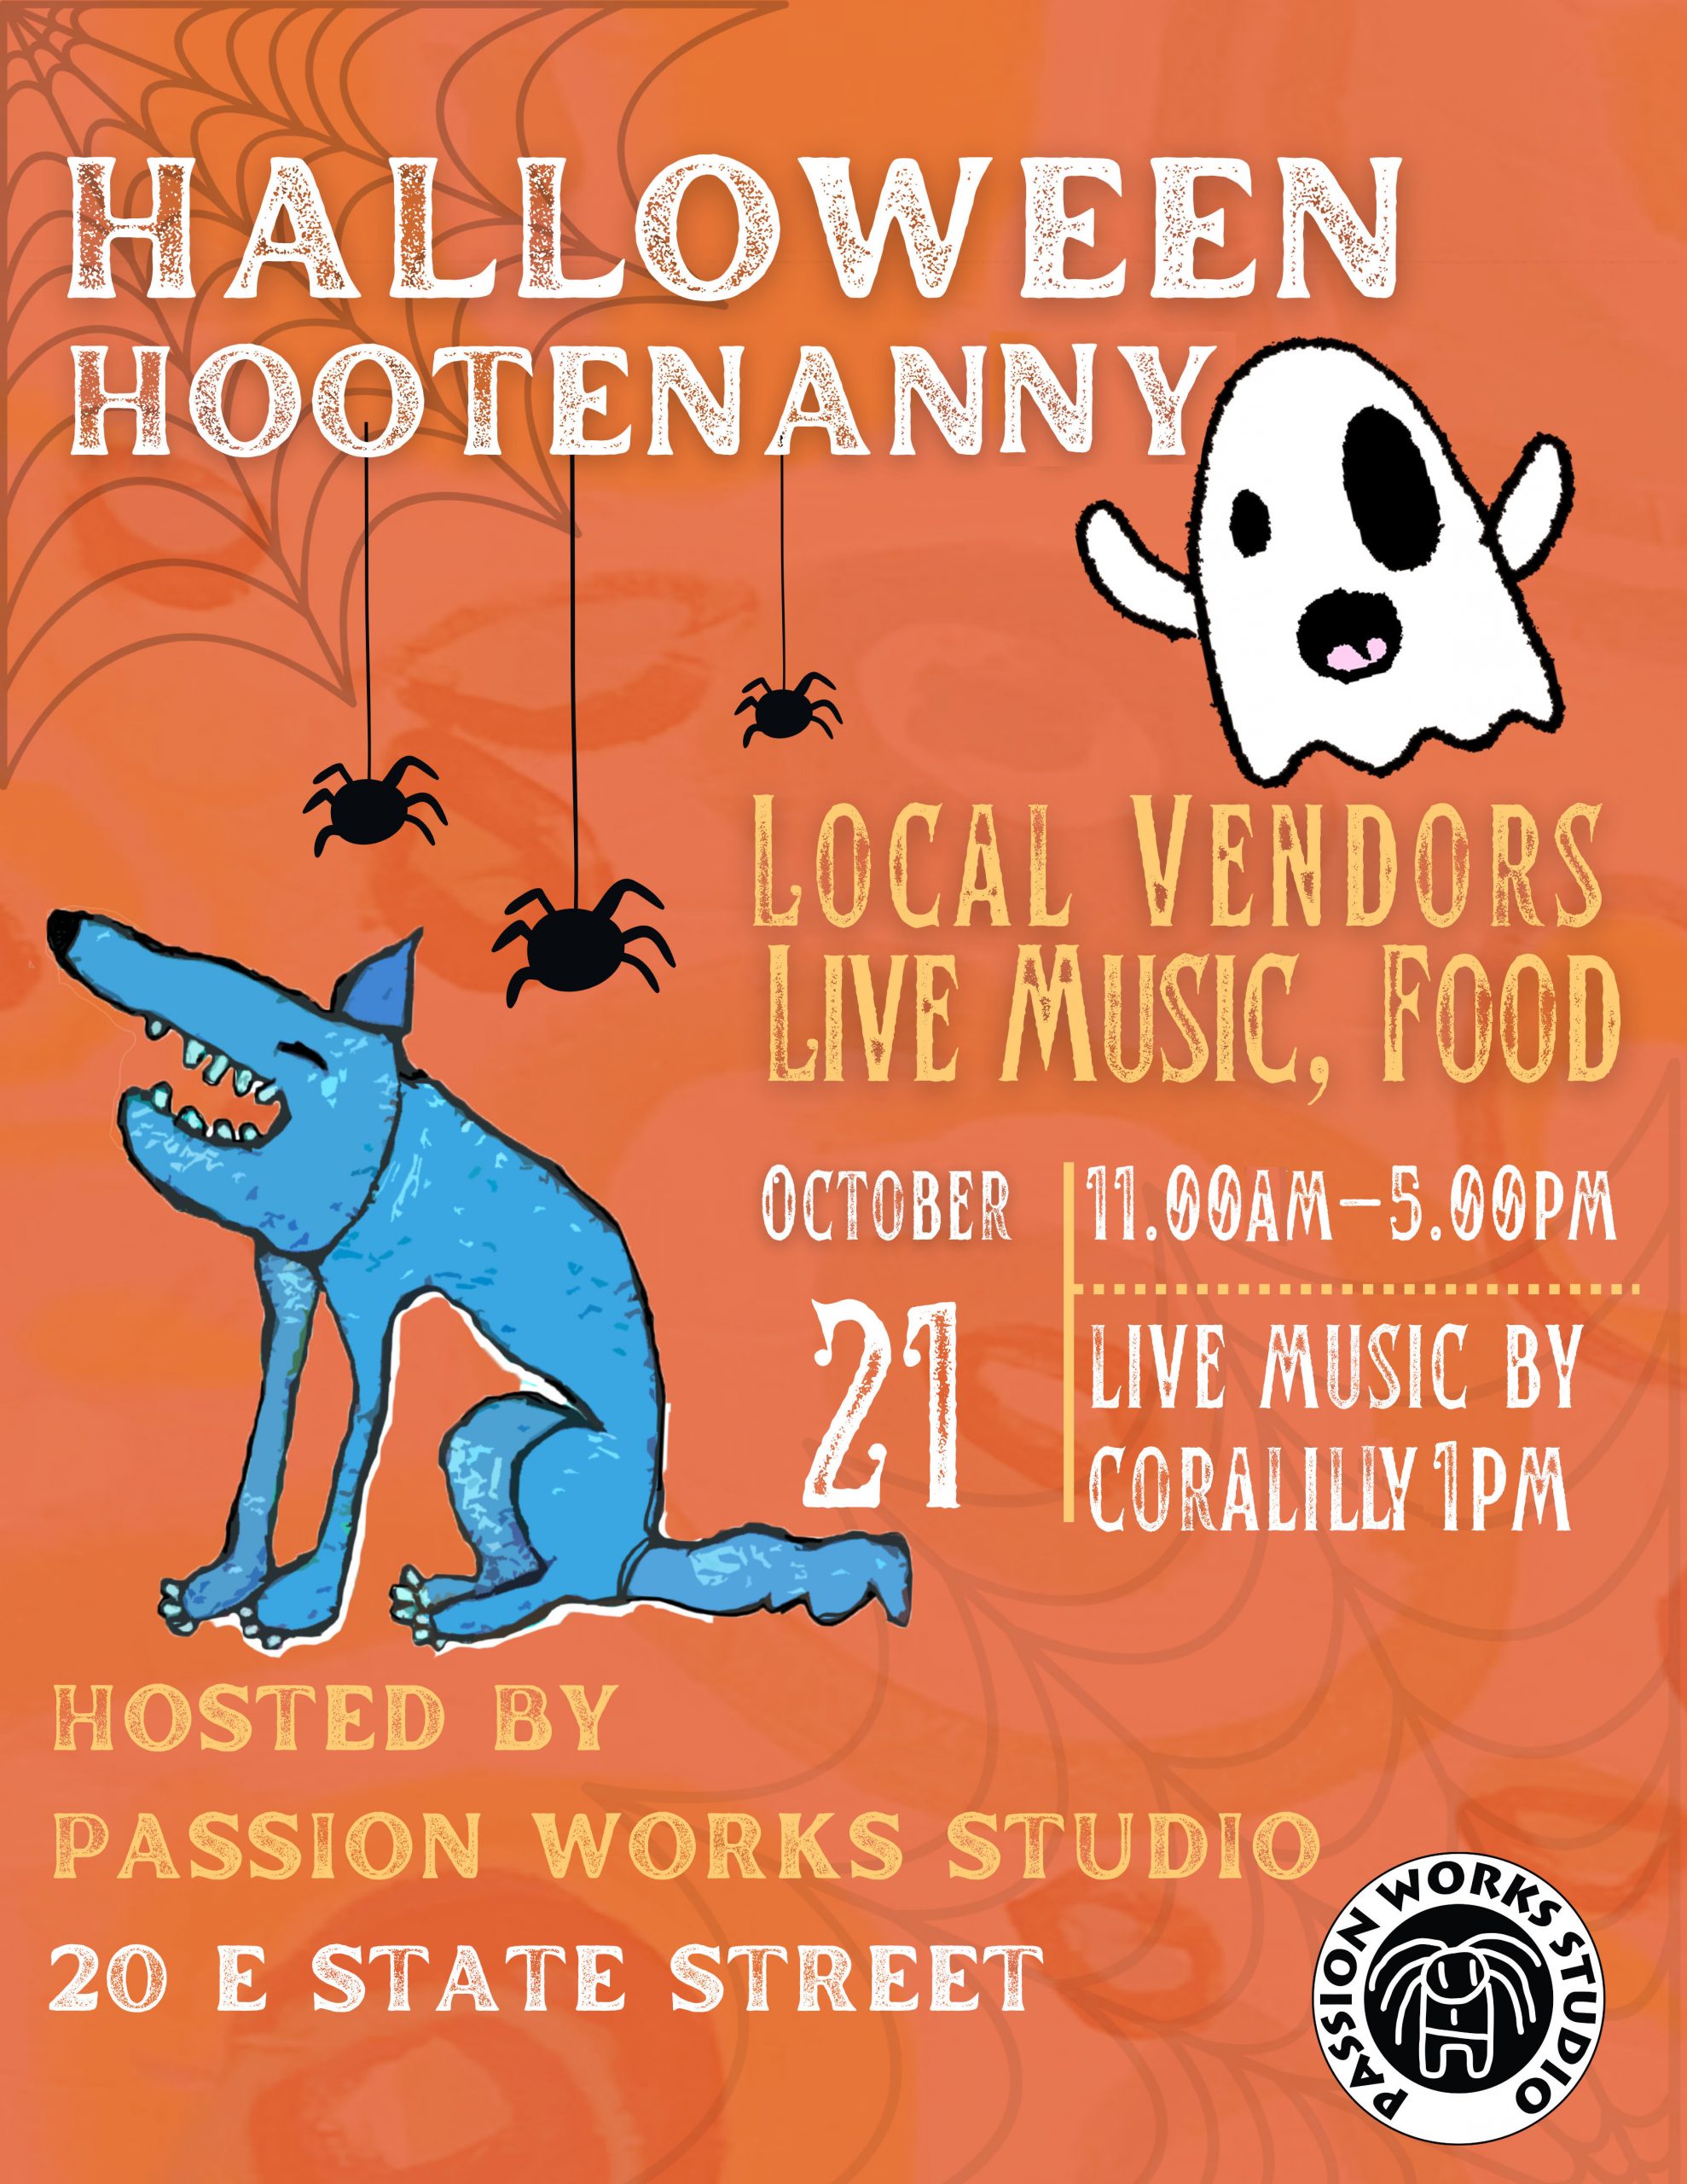 A flyer for the Halloween Hootenanny event